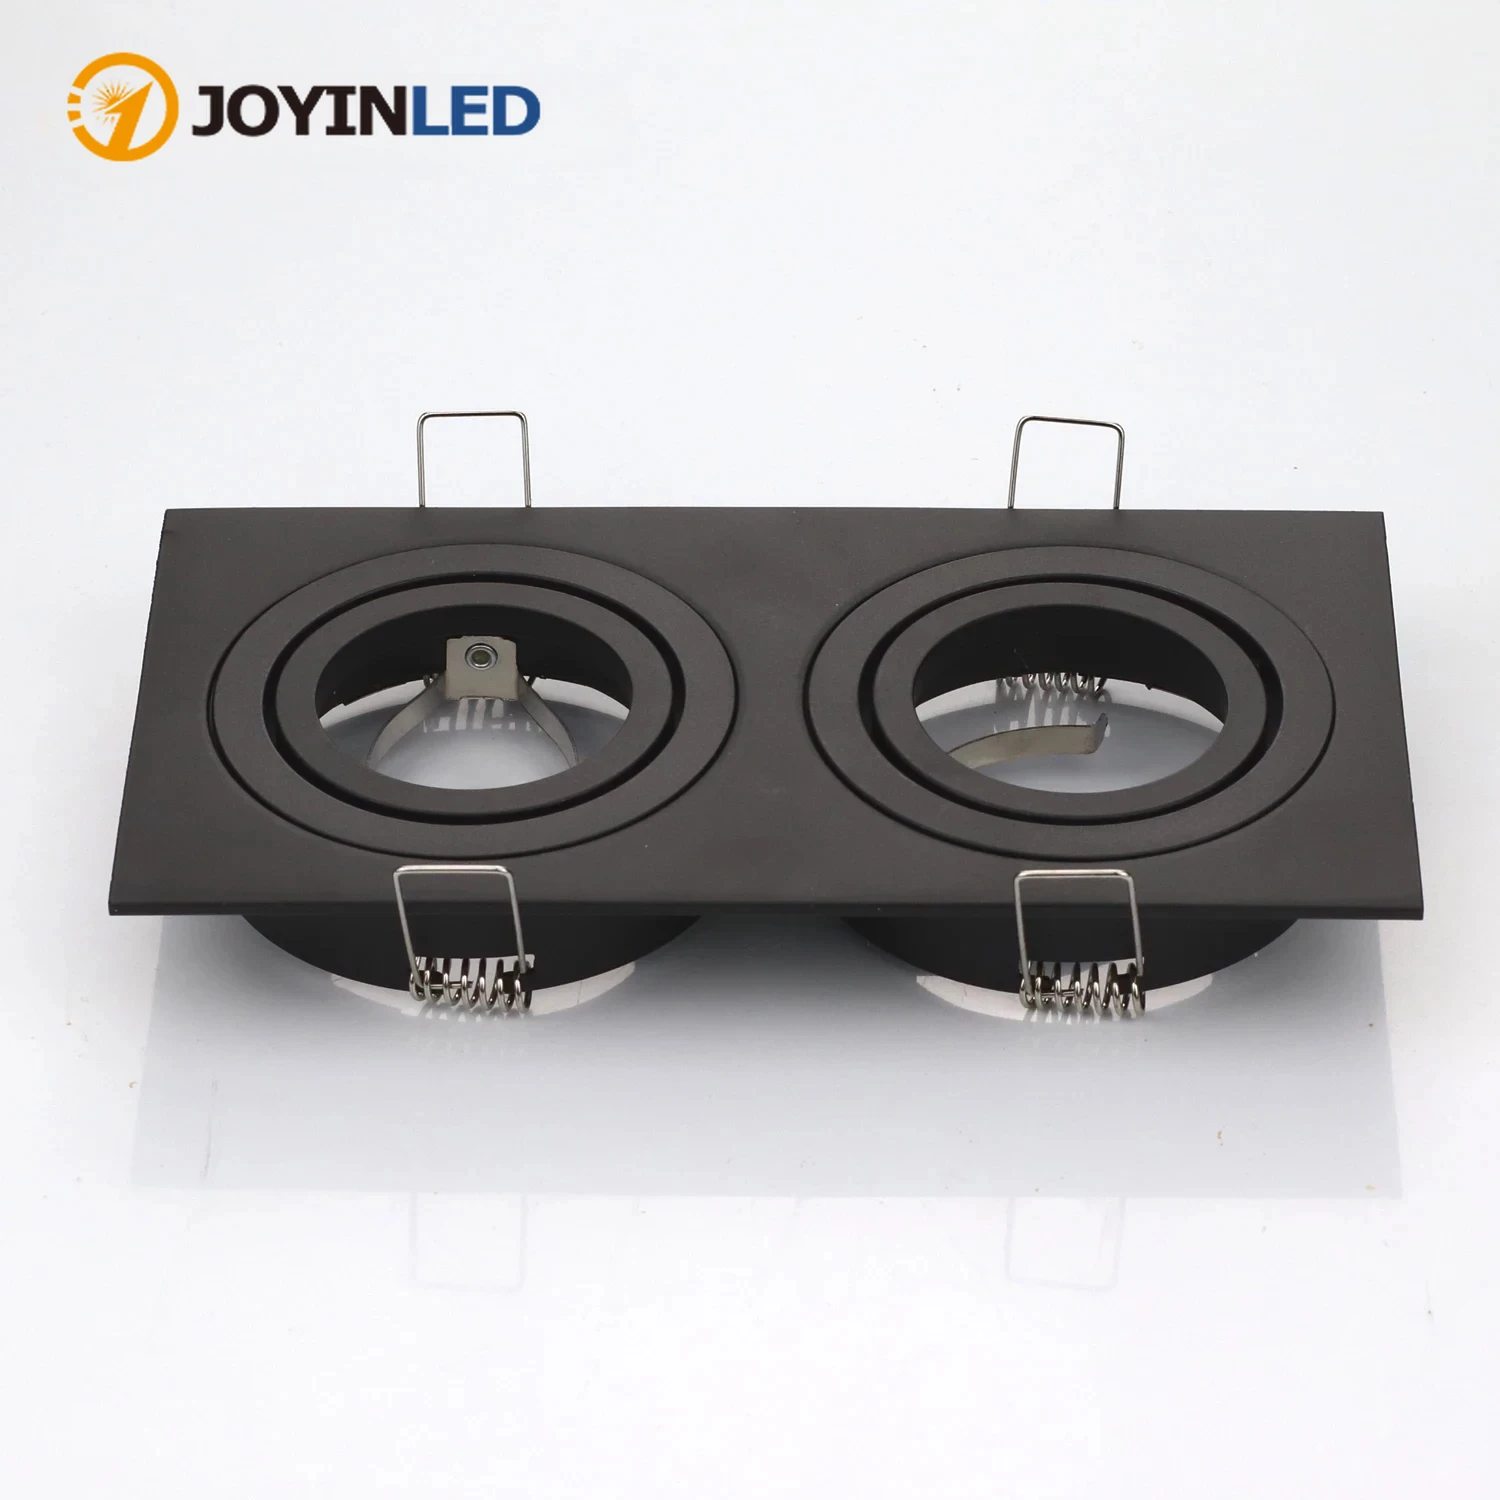 

Custom Ceiling Lights Square Double Head Cut Out 155*85mm Fixtures GU10 MR16 GU5.3 Recessed Led Lighting Downlights